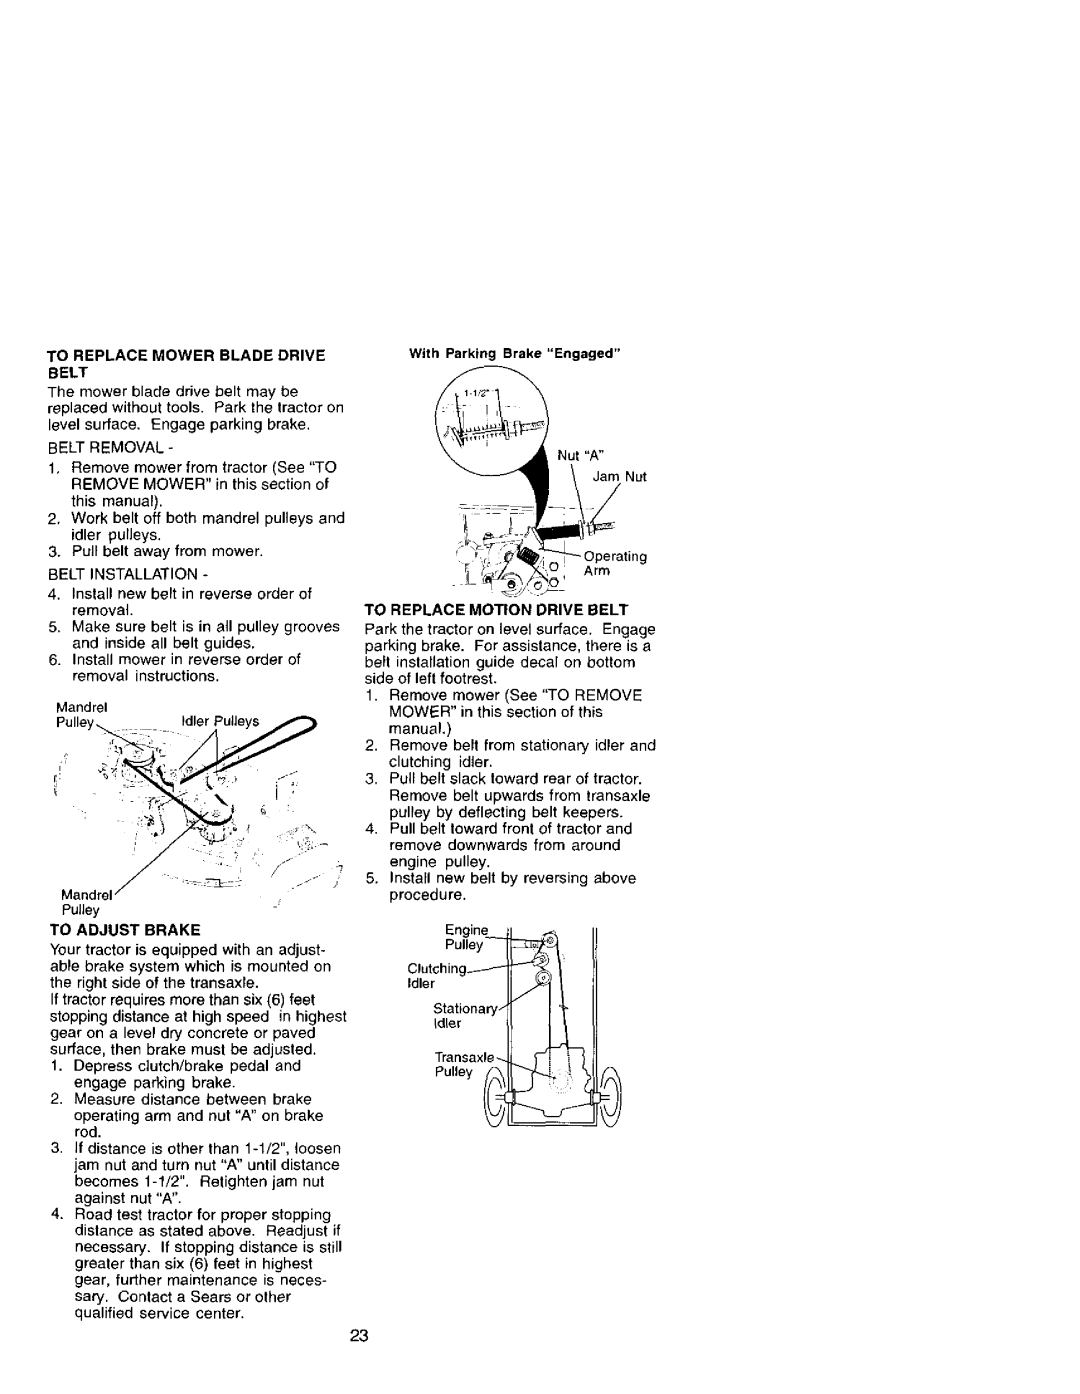 Craftsman 917.27207 owner manual To Replace Mower Blade Drive Belt 